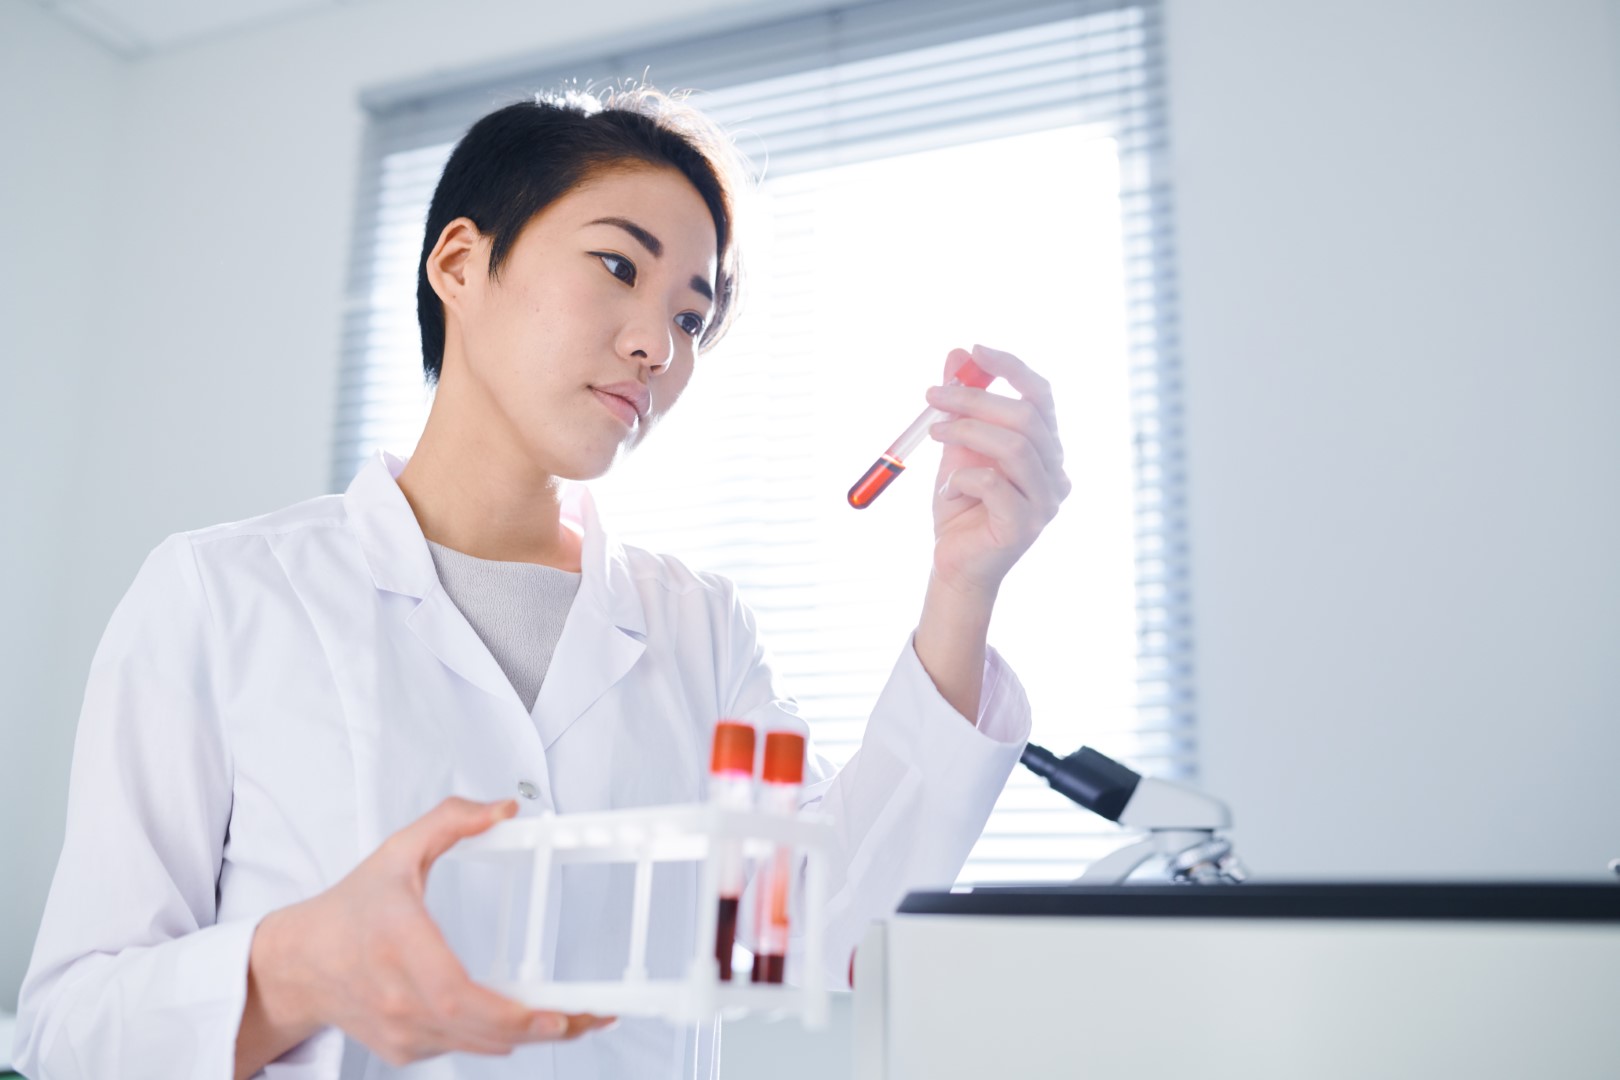 A woman with short hair looking at a vial of blood in her hand.